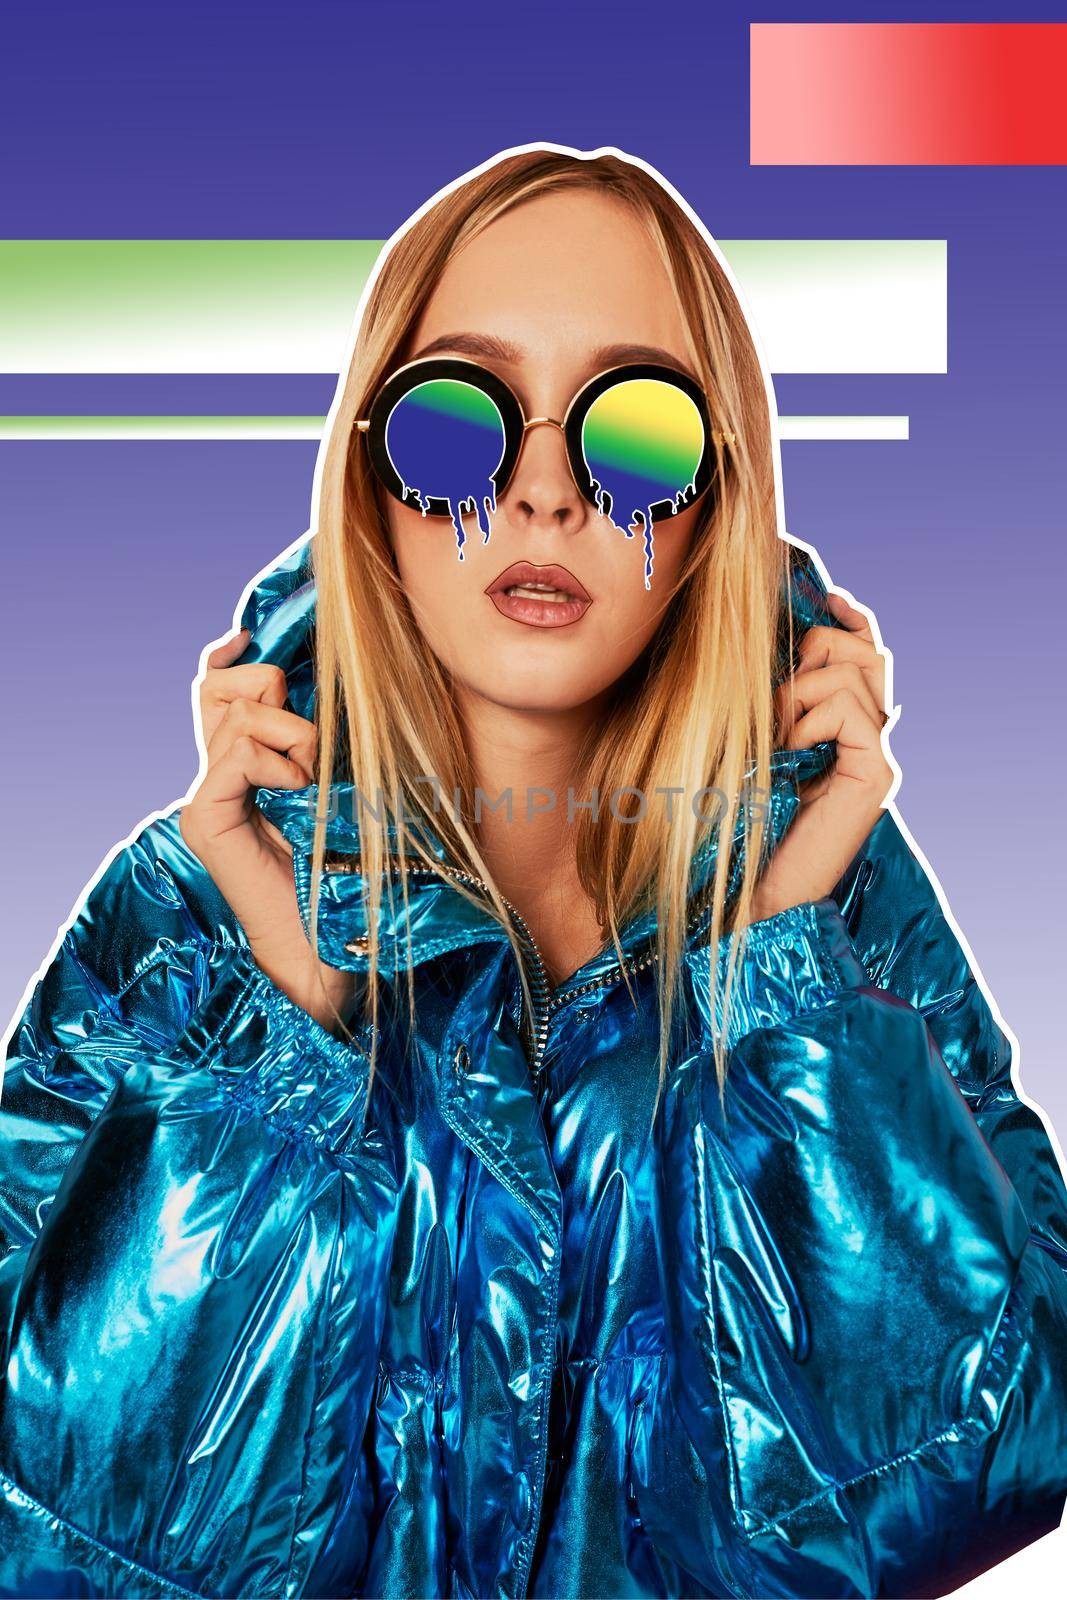 Close-up fashion portrait of a charming woman in a warm shiny jacket and cartoon melting glasses, holding her hood and posing against a gradient background of studio. Art collage.